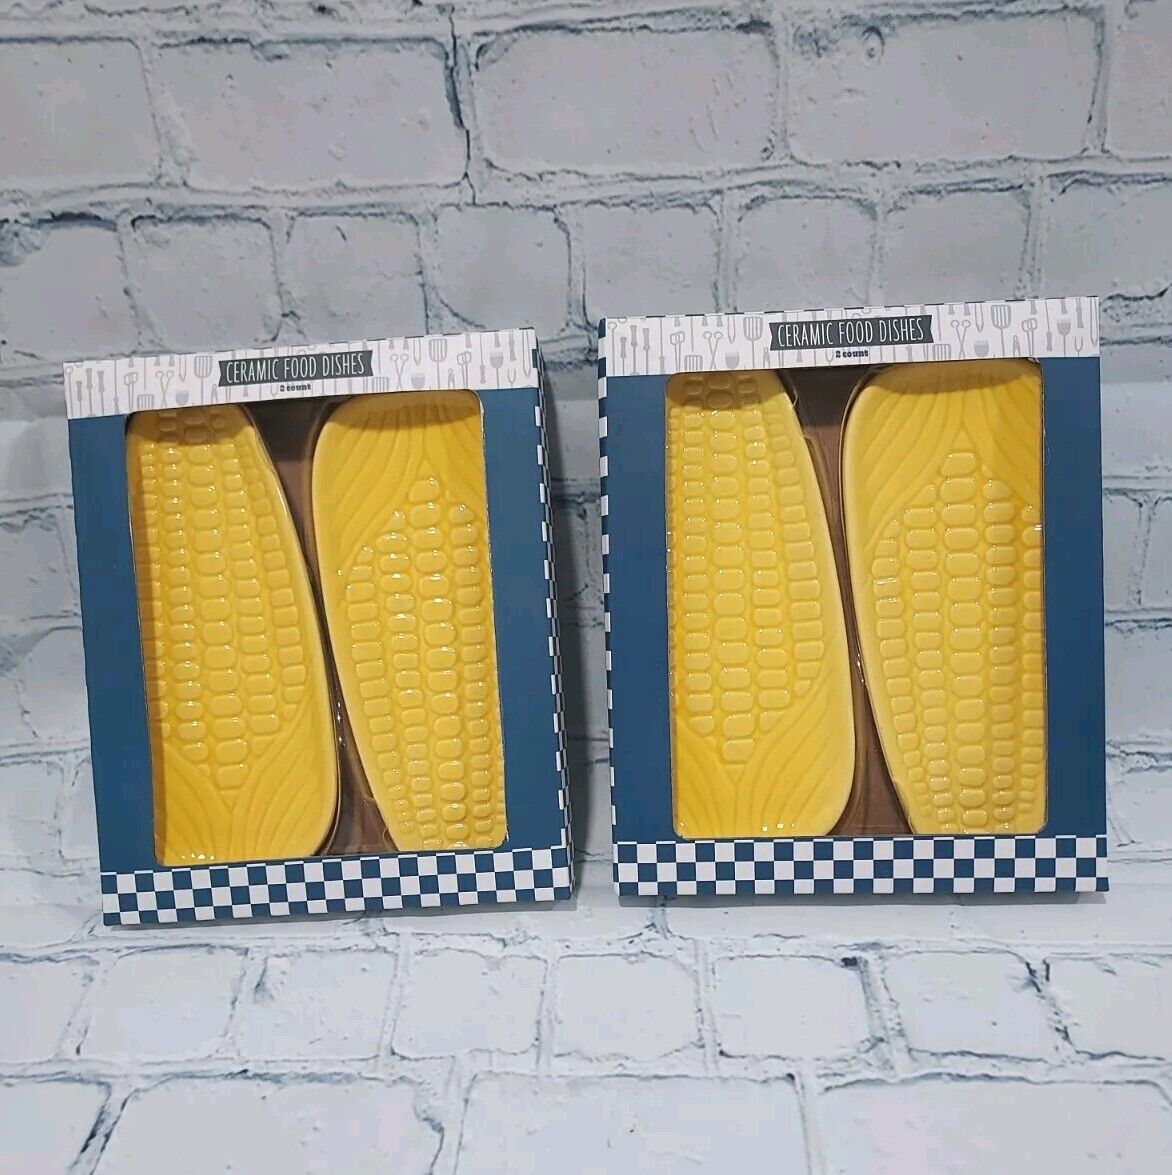 Corn On The Cob Ceramic Food Dishes Set Of 2 Brand New. Food and Microwave Safe